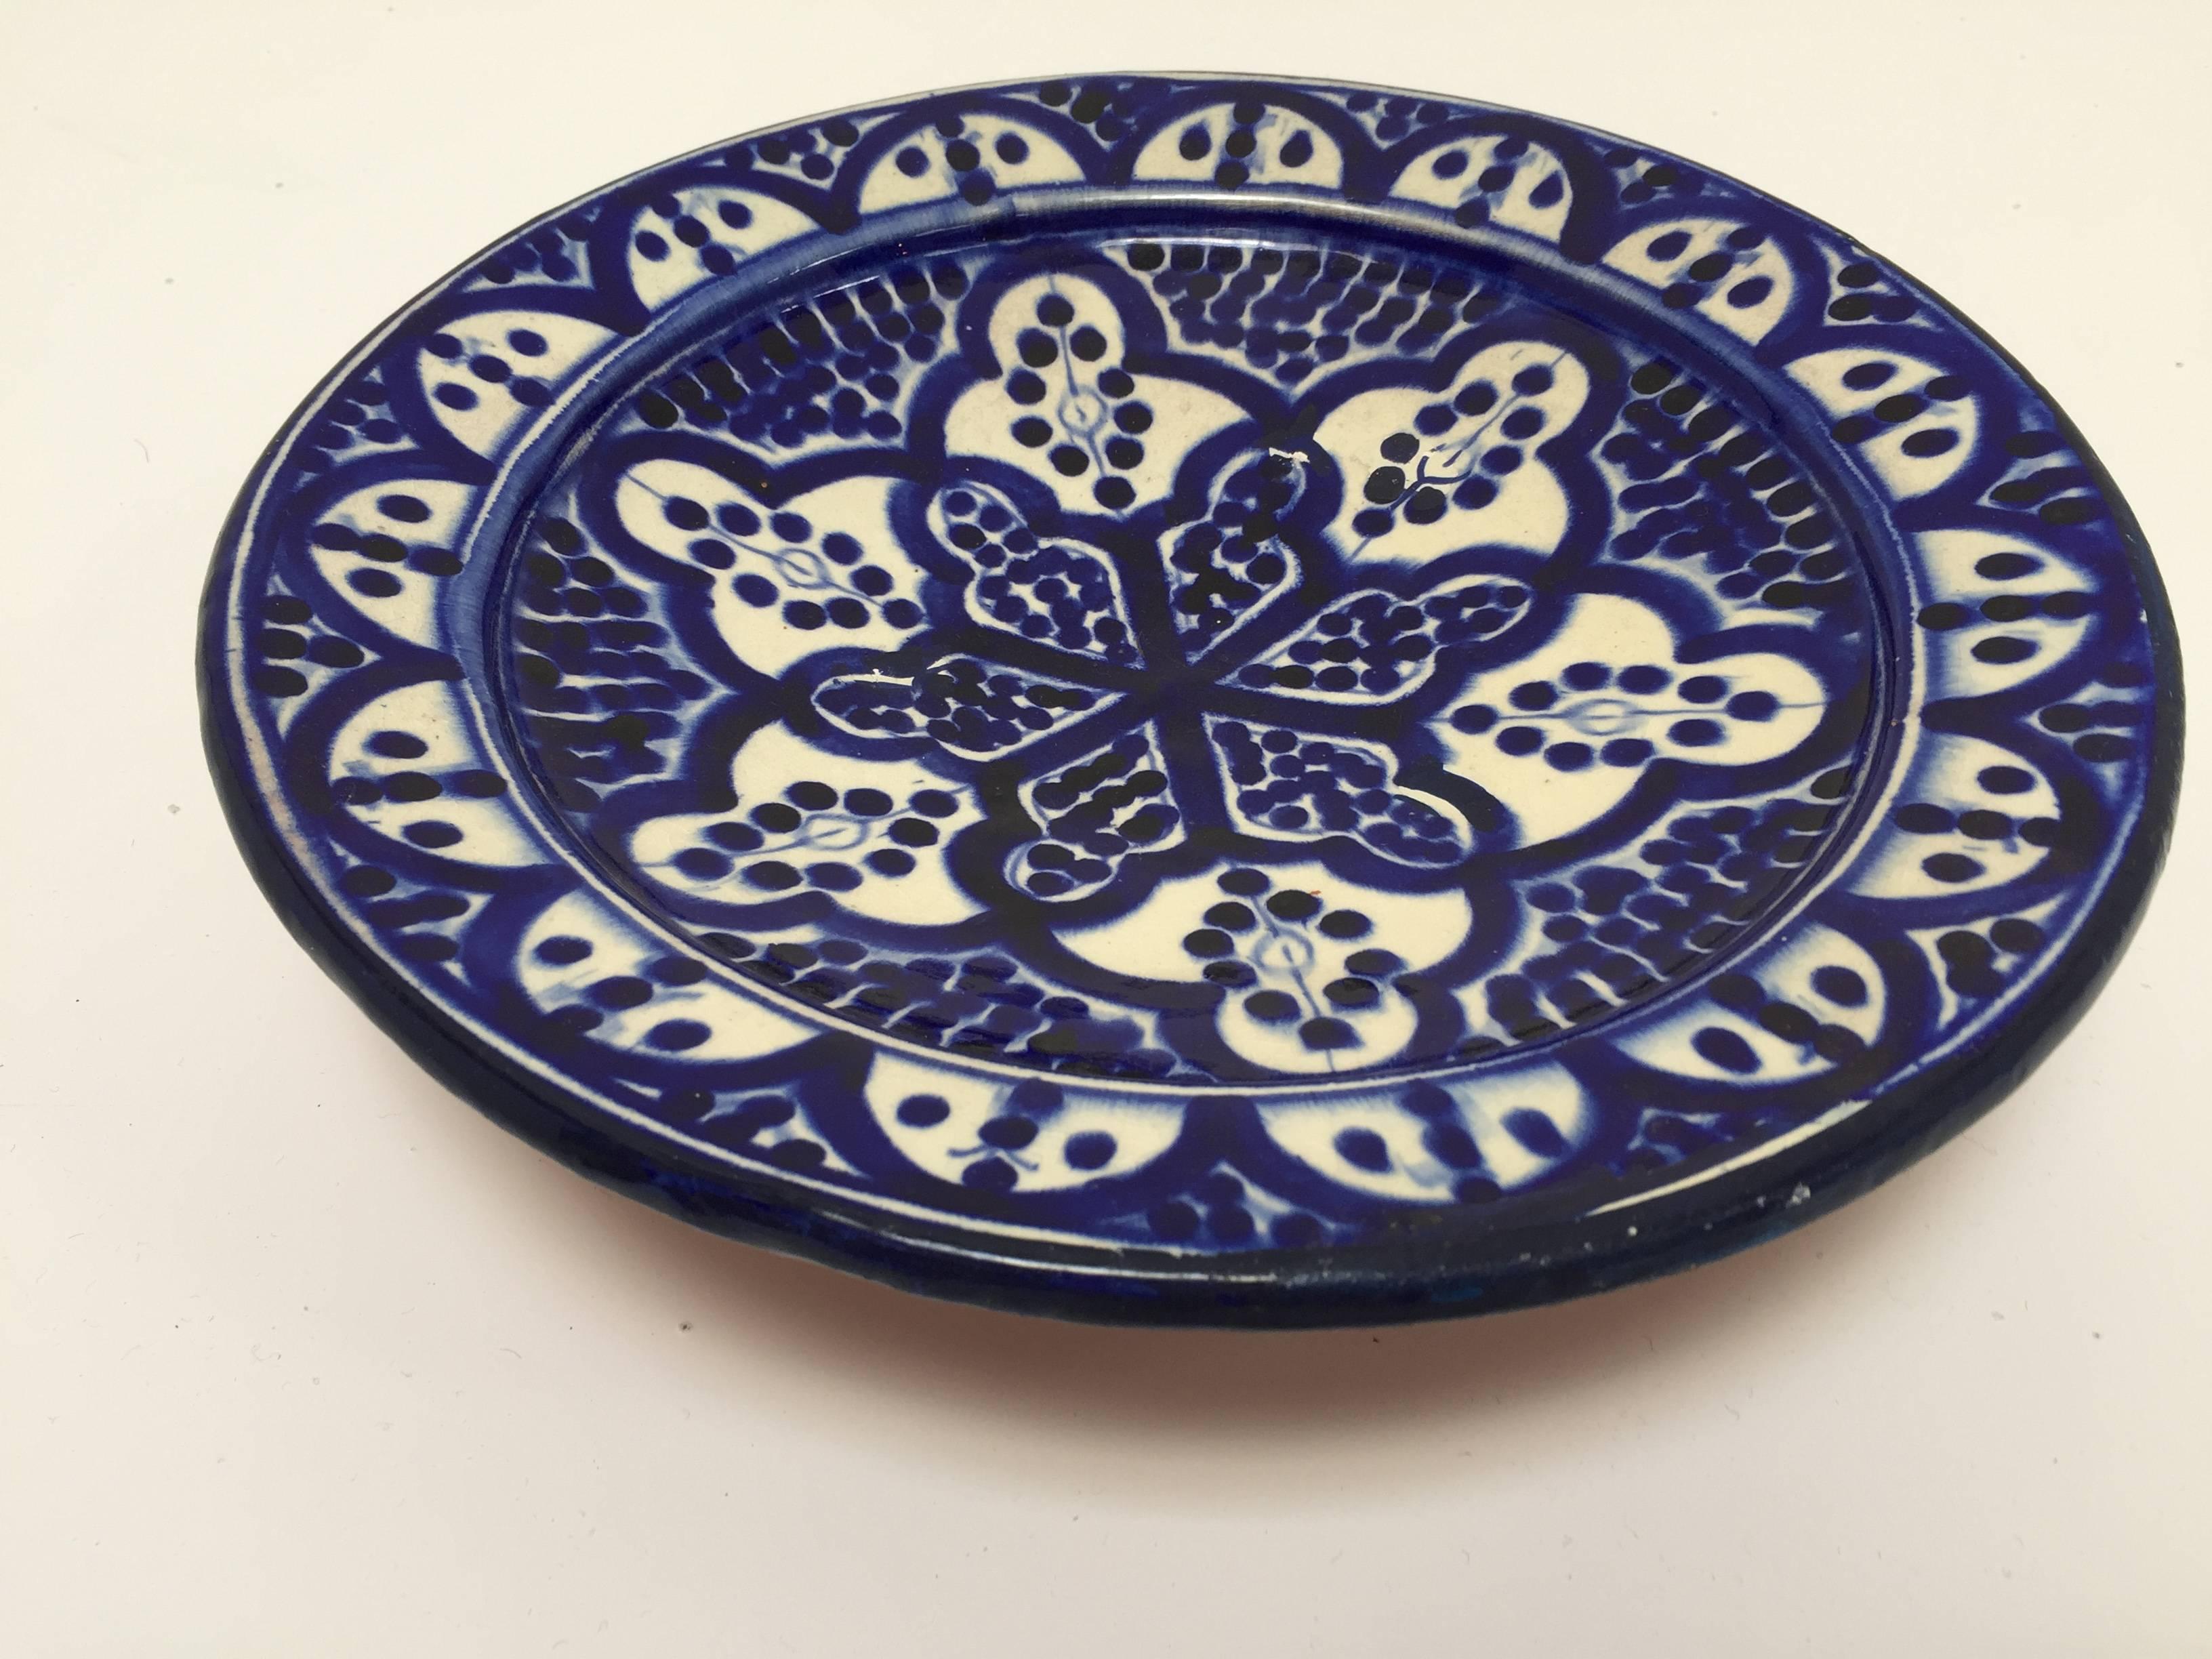 Moorish Moroccan Blue and White Handcrafted Ceramic Plate